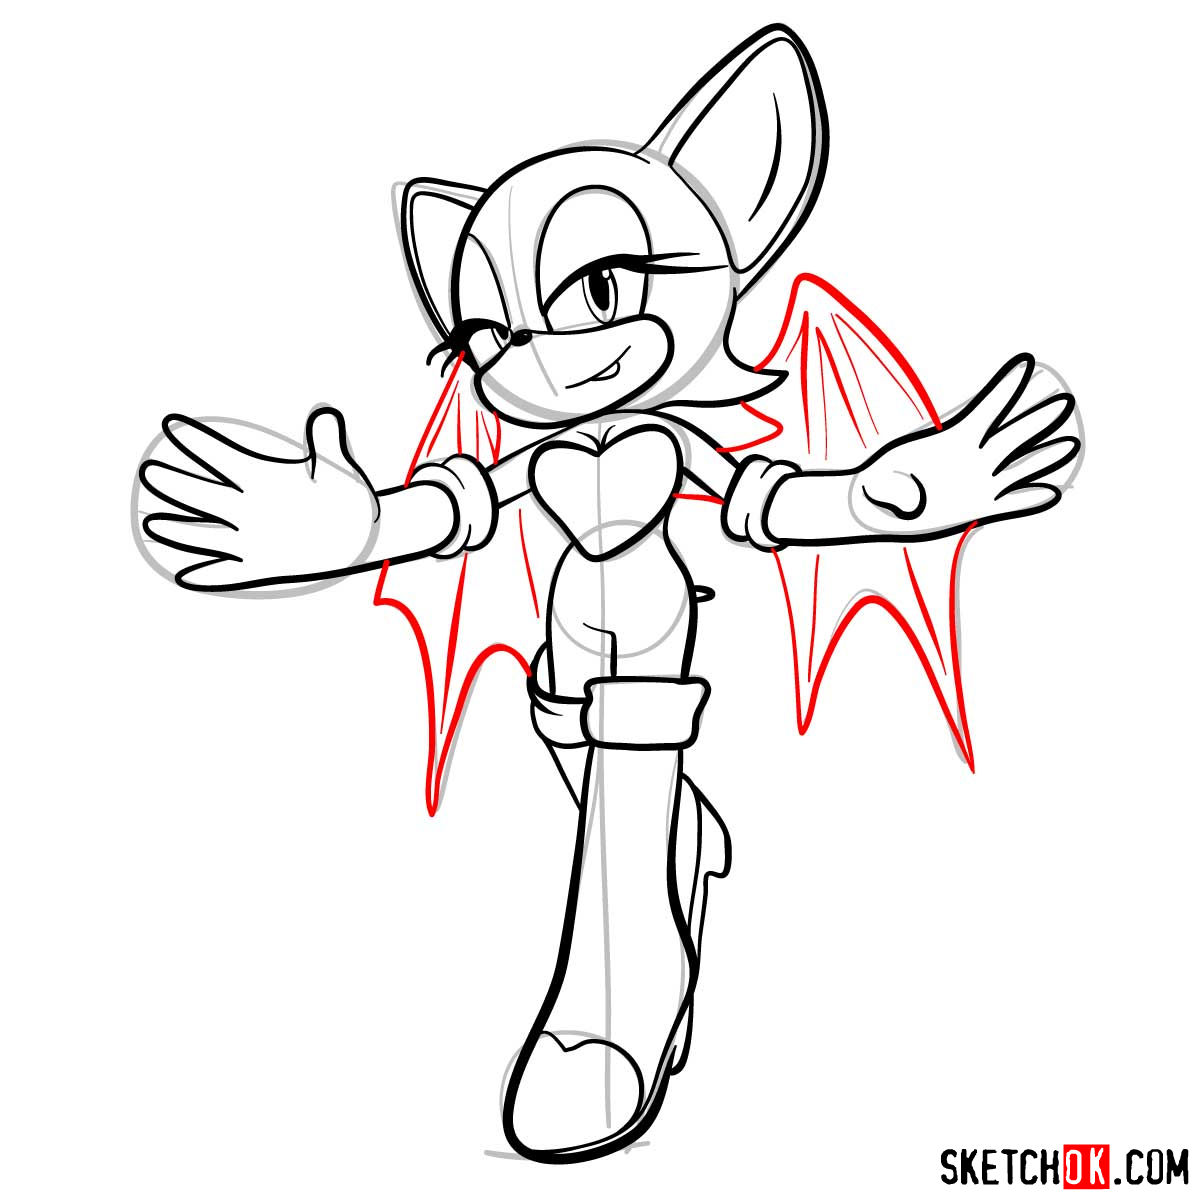 How to draw Rouge the Bat from Sonic the Hedgehog - step 12